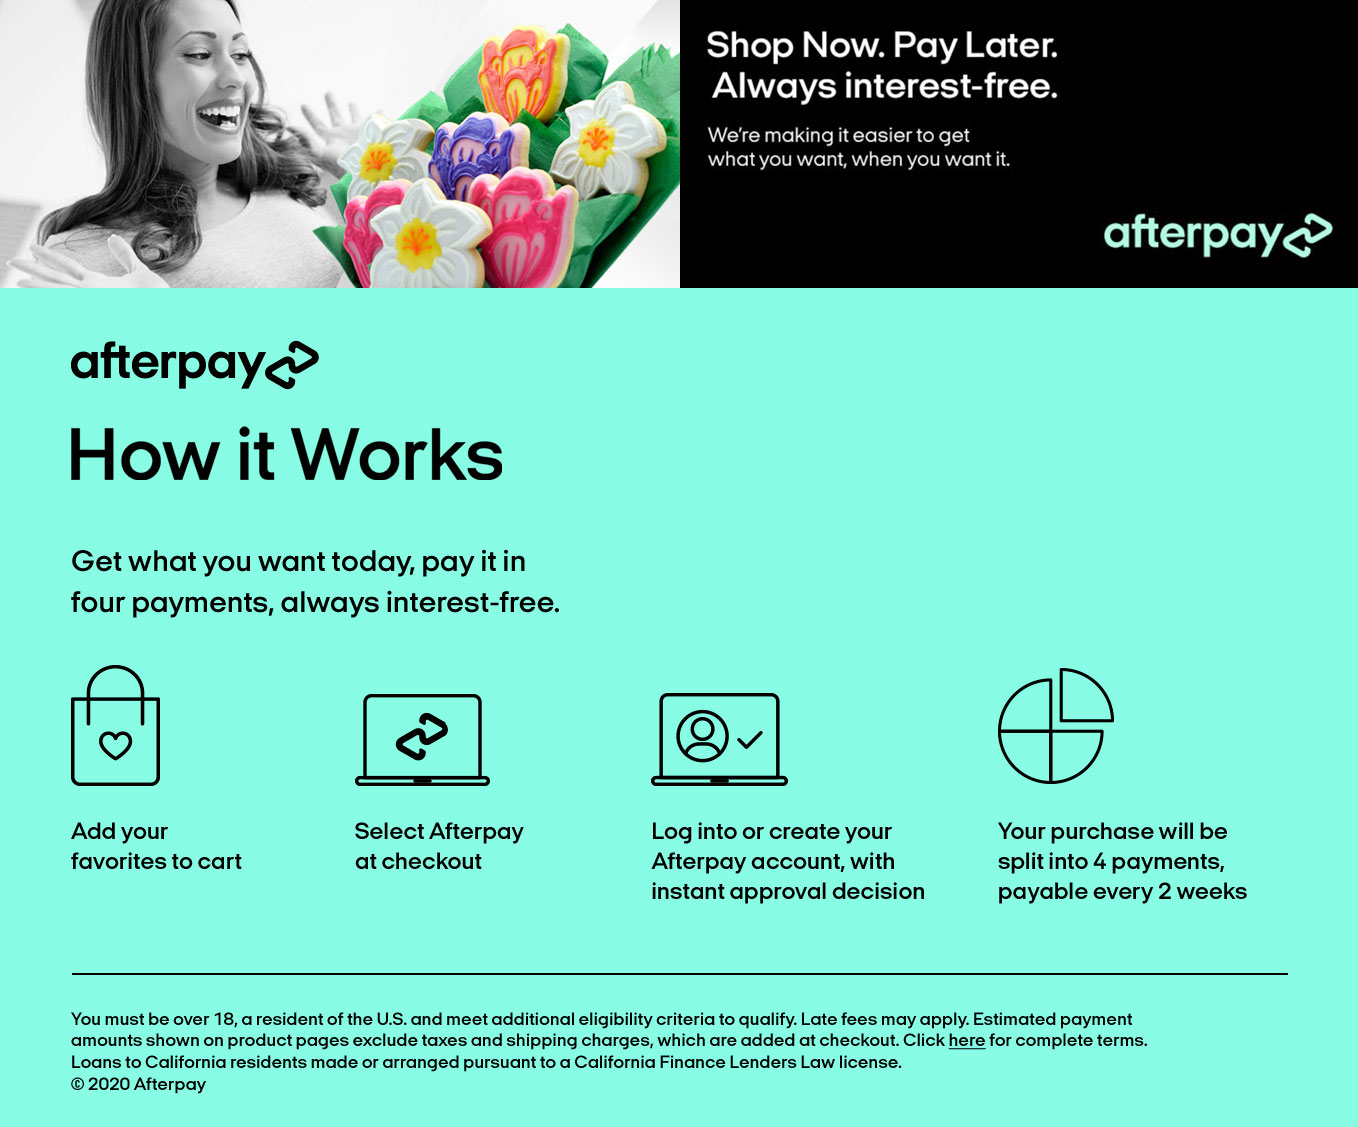 Buy Now Pay Later with AfterPay